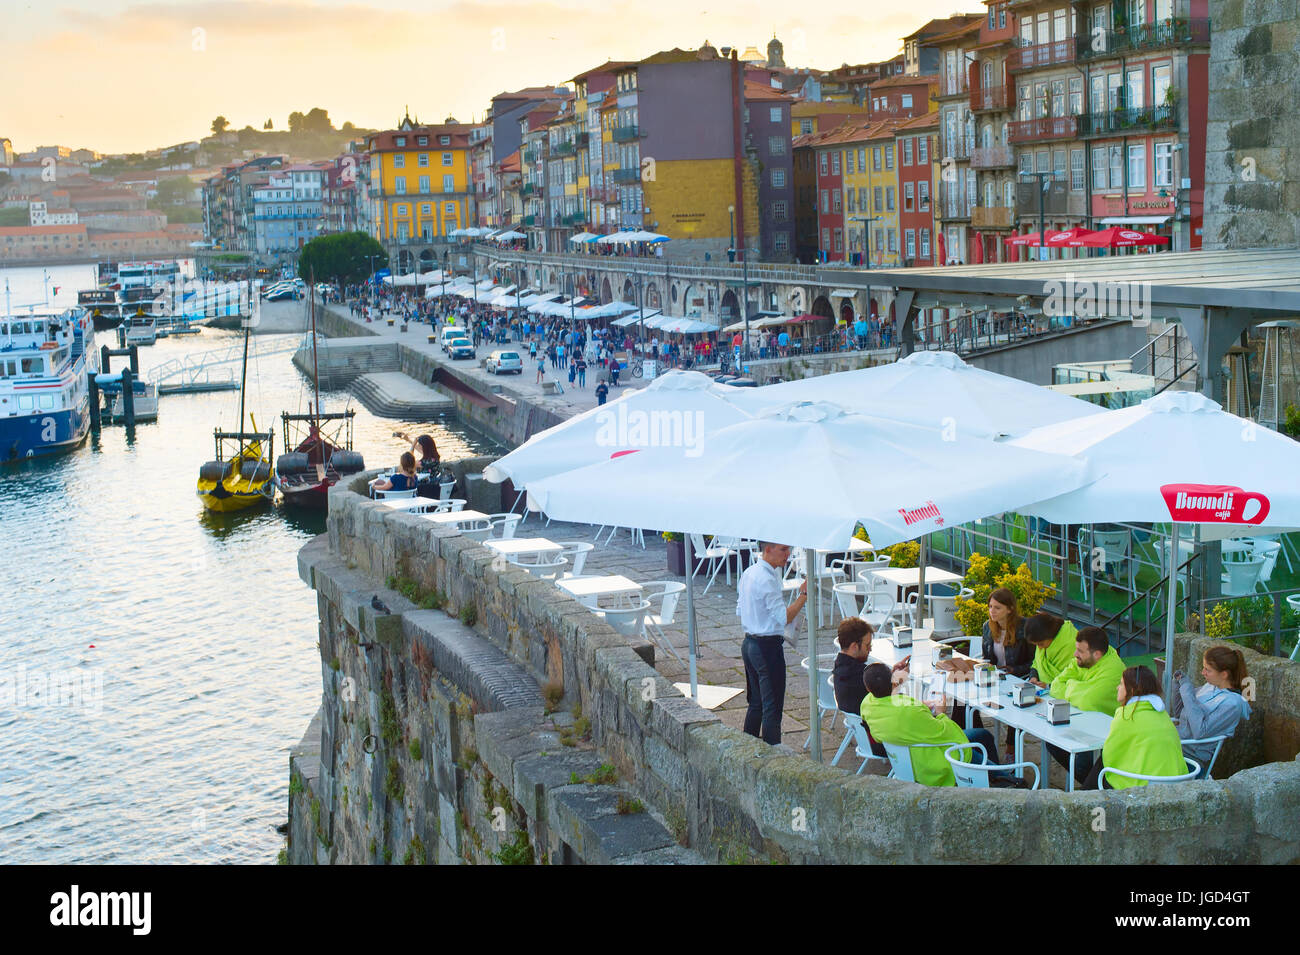 PORTO, PORTUGAL - JUNE 01, 2017: People at street reataurant on quayside of Porto. About 10 million tourist visit Portugal every year. Stock Photo